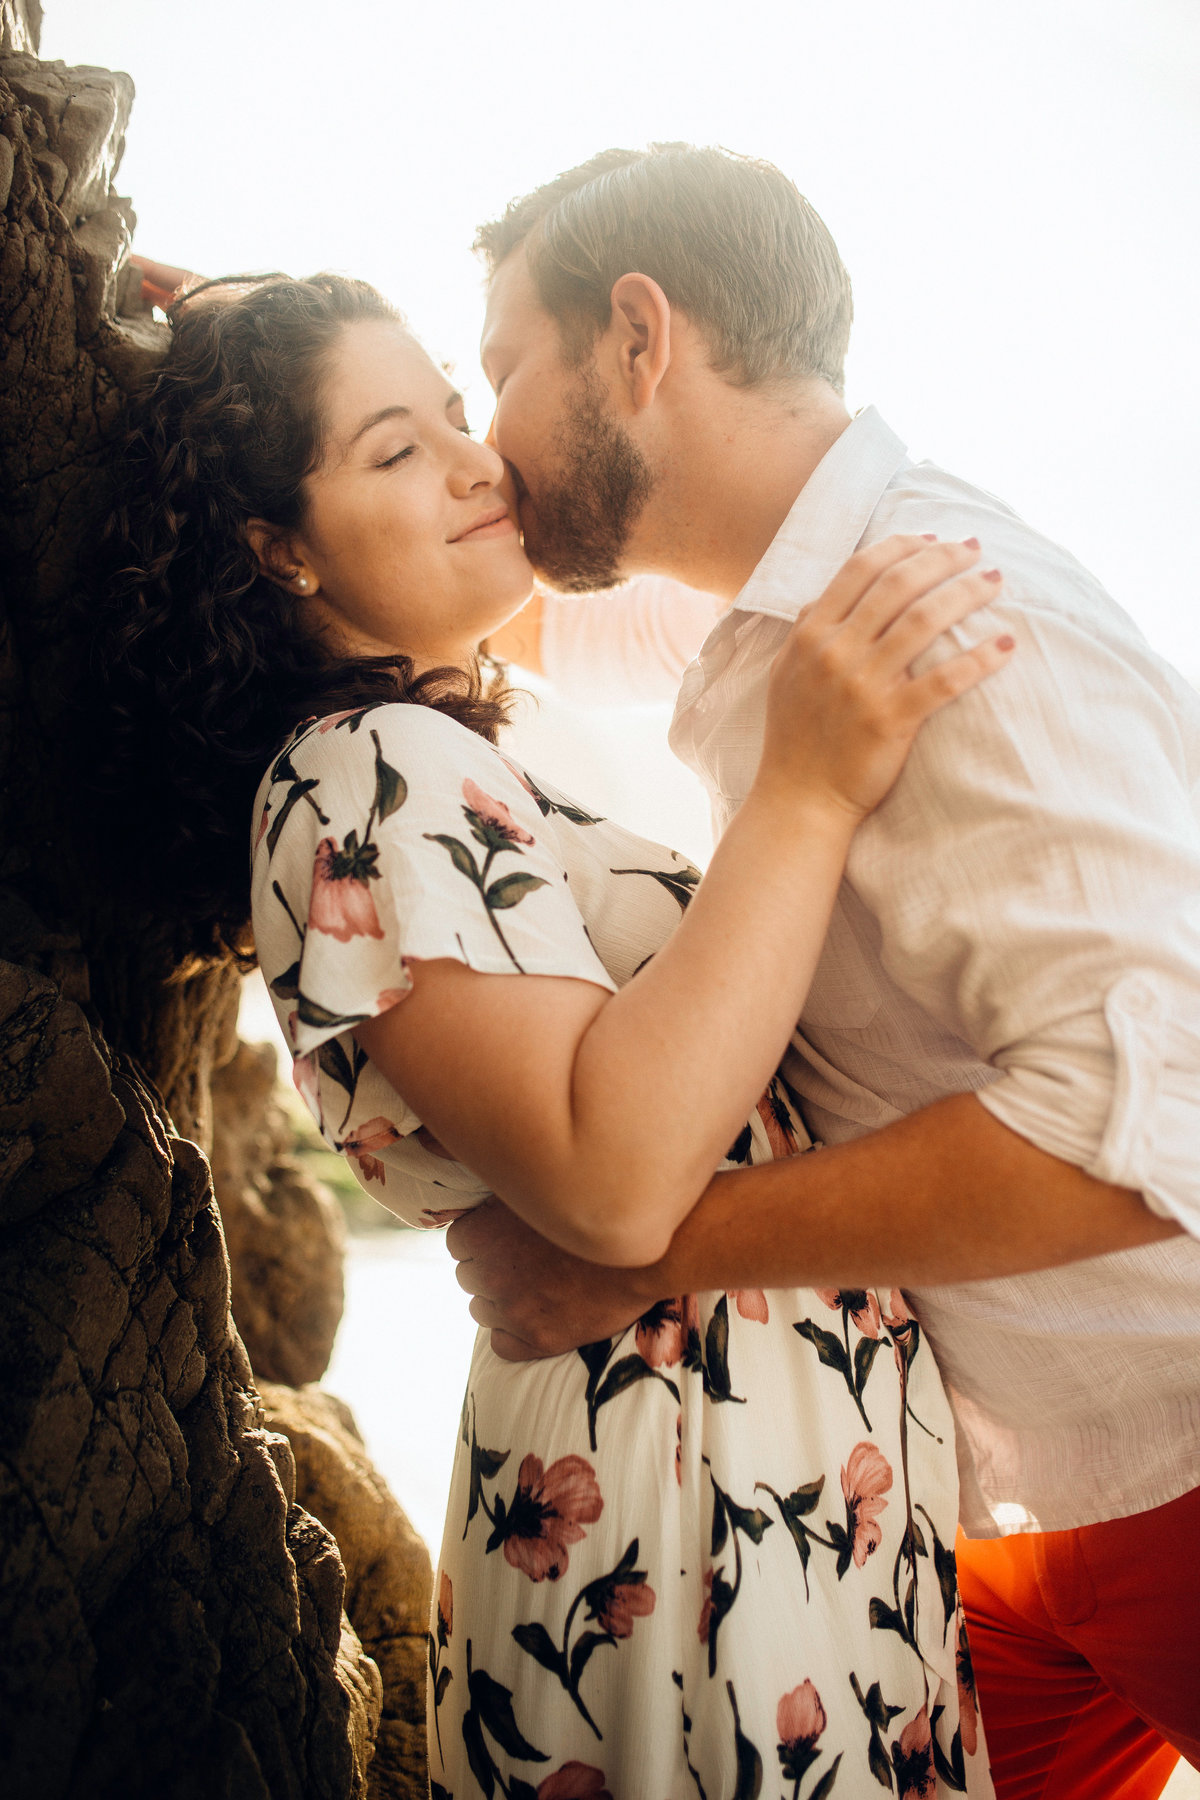 Engagement Photograph Of  Man Kissing a Woman On The Cheeks Los Angeles